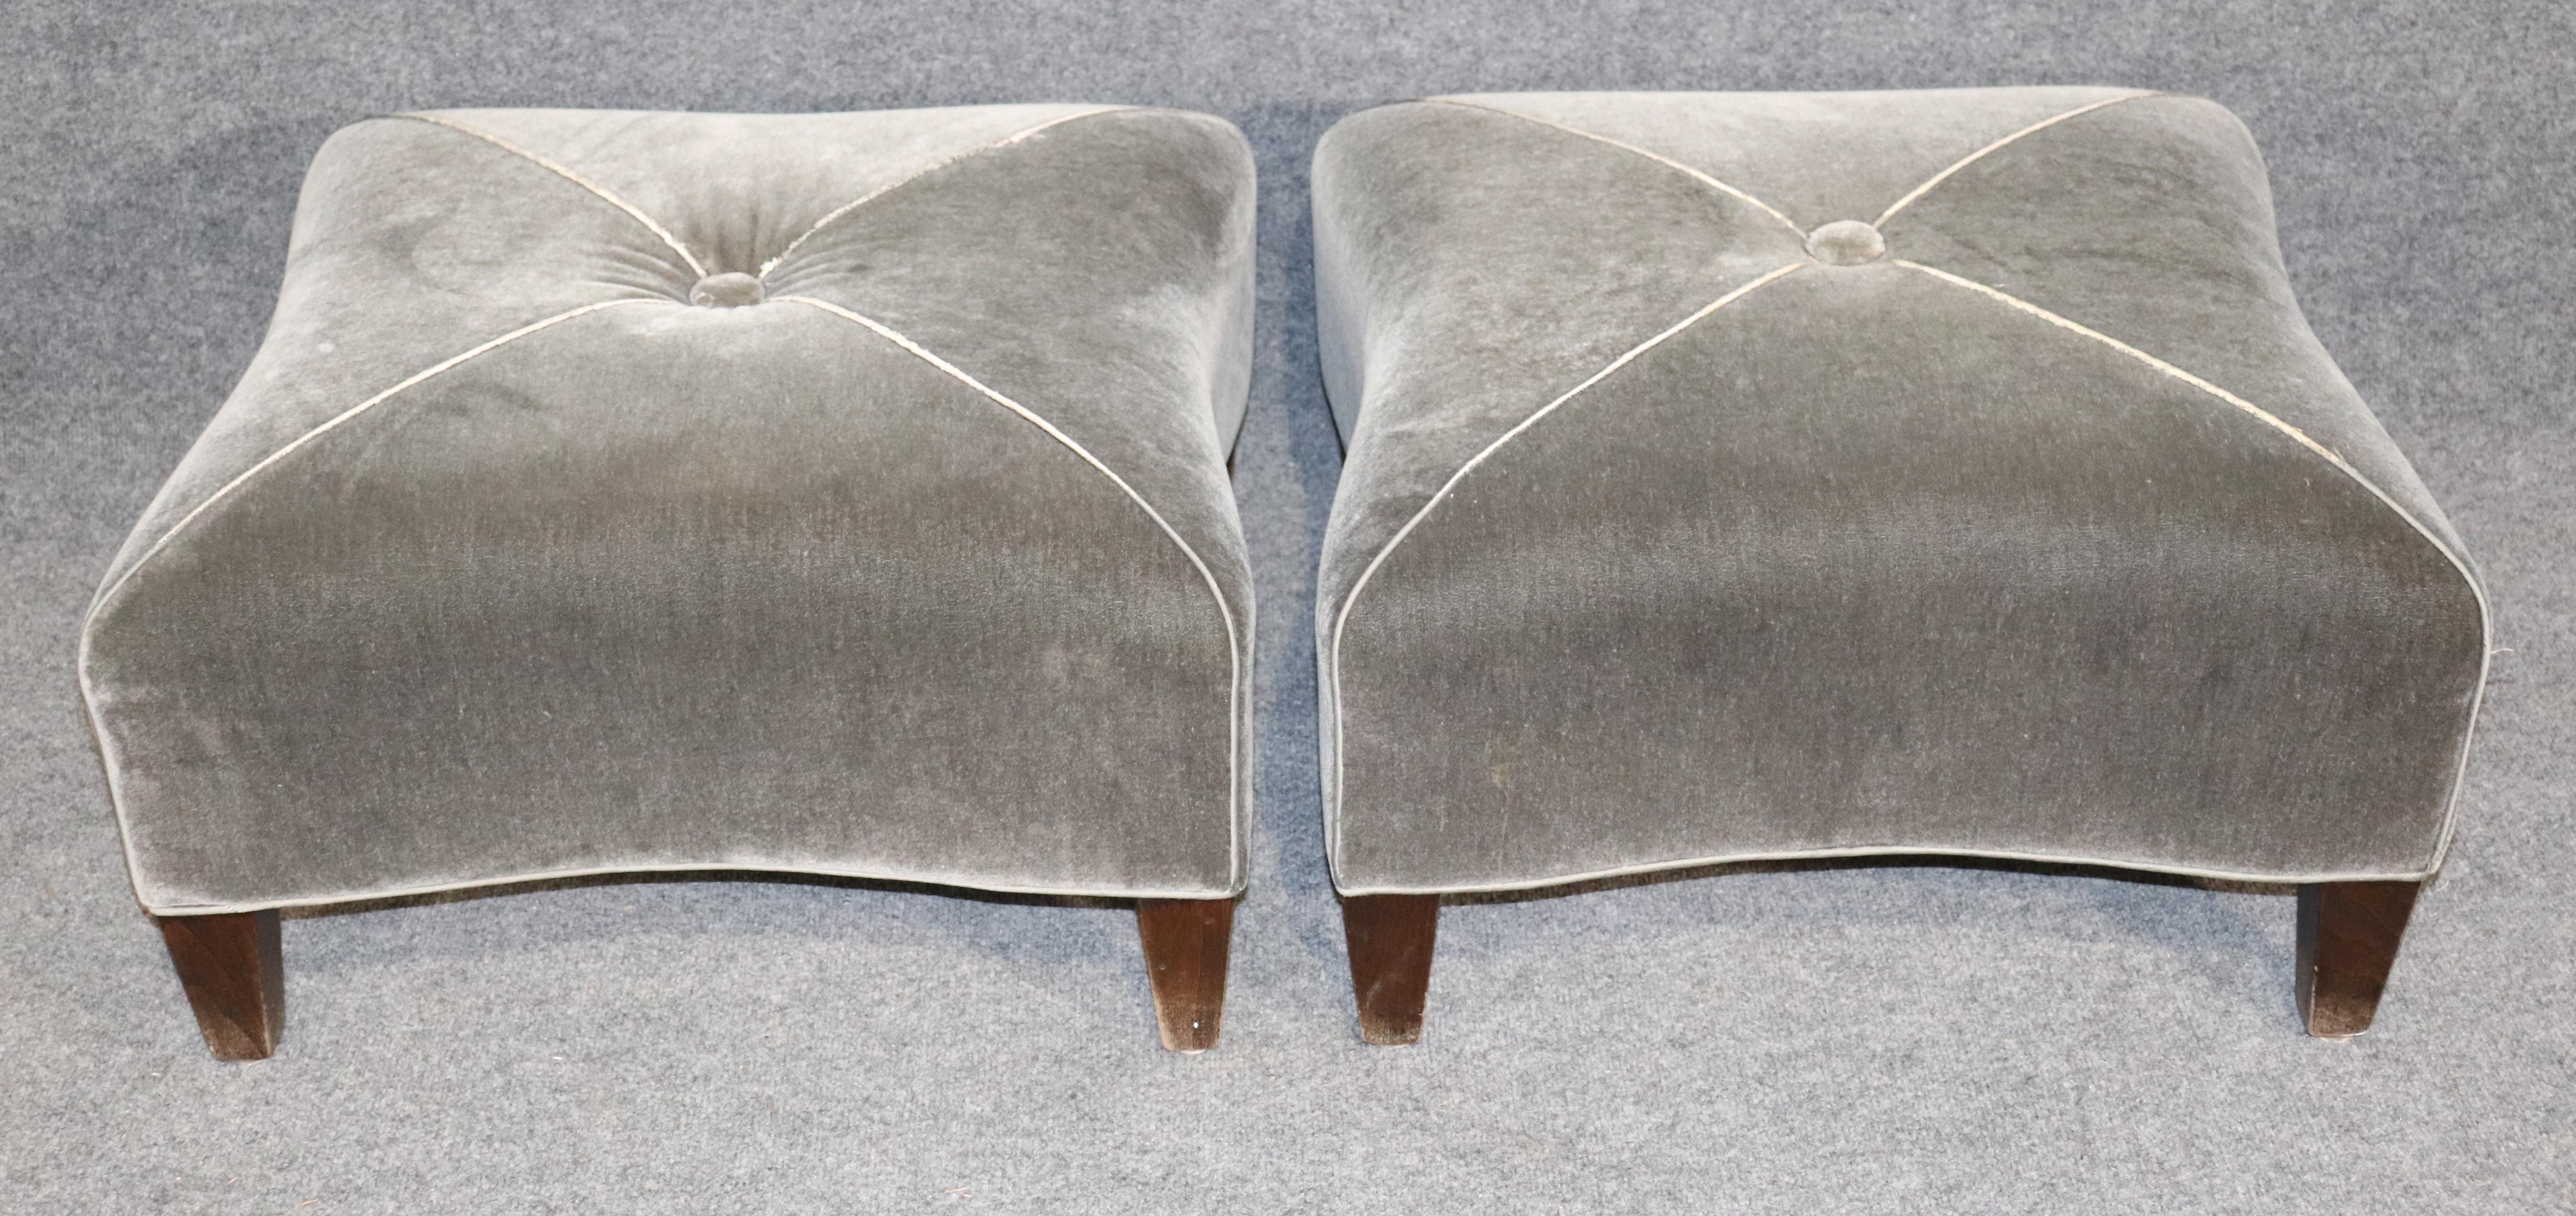 Pair of soft grey ottomans with wood feet. Simple and elegant shape with single button tufting.
Please confirm location.
